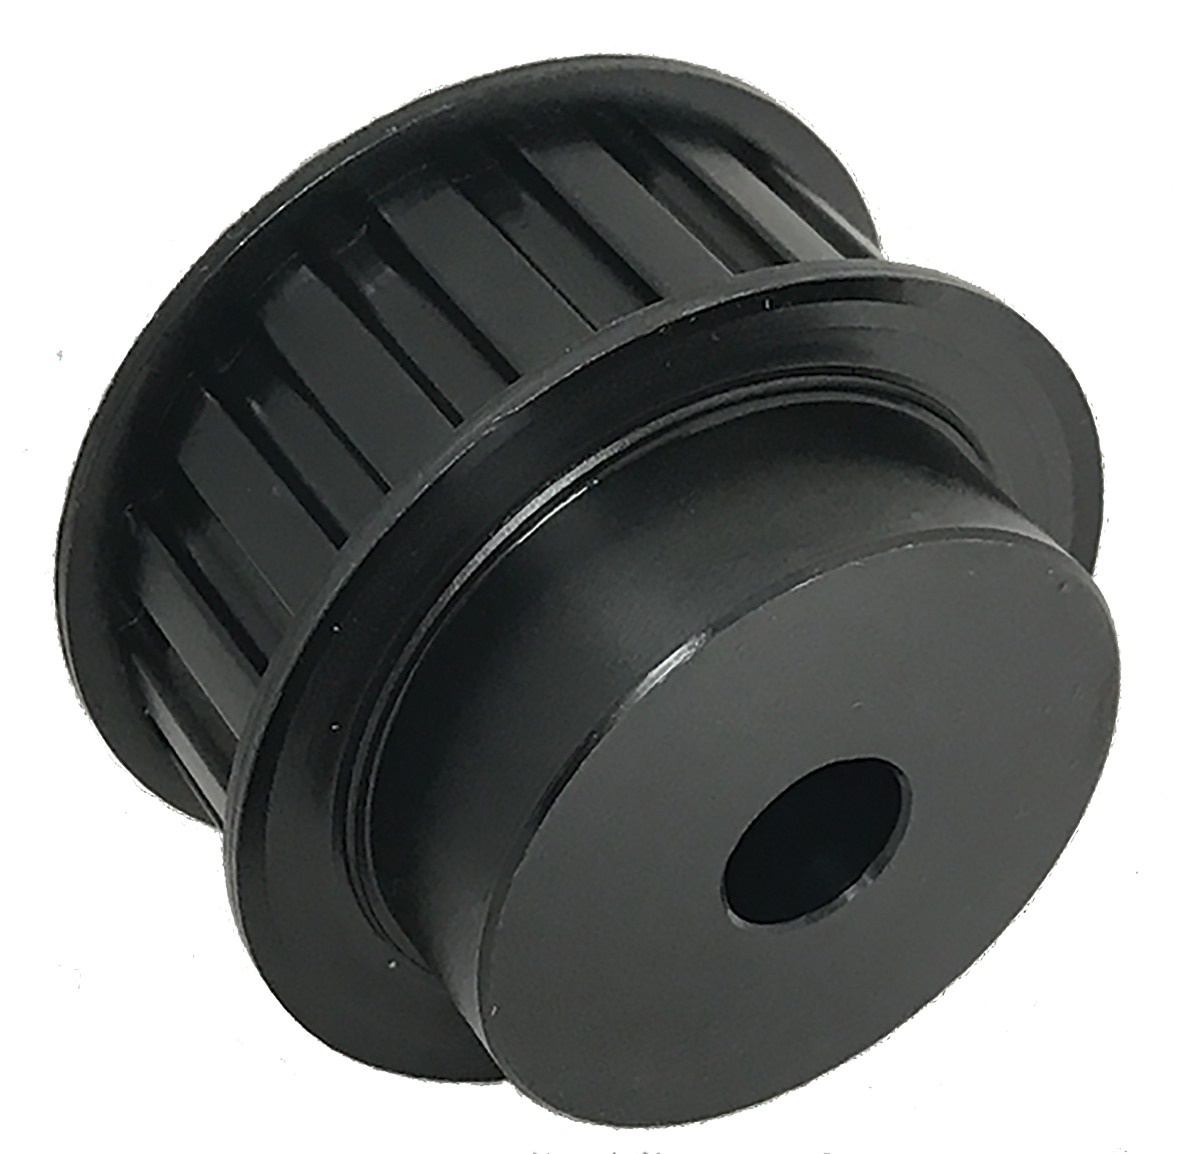 17H100-6FS7 - Steel Imperial Pitch Pulleys